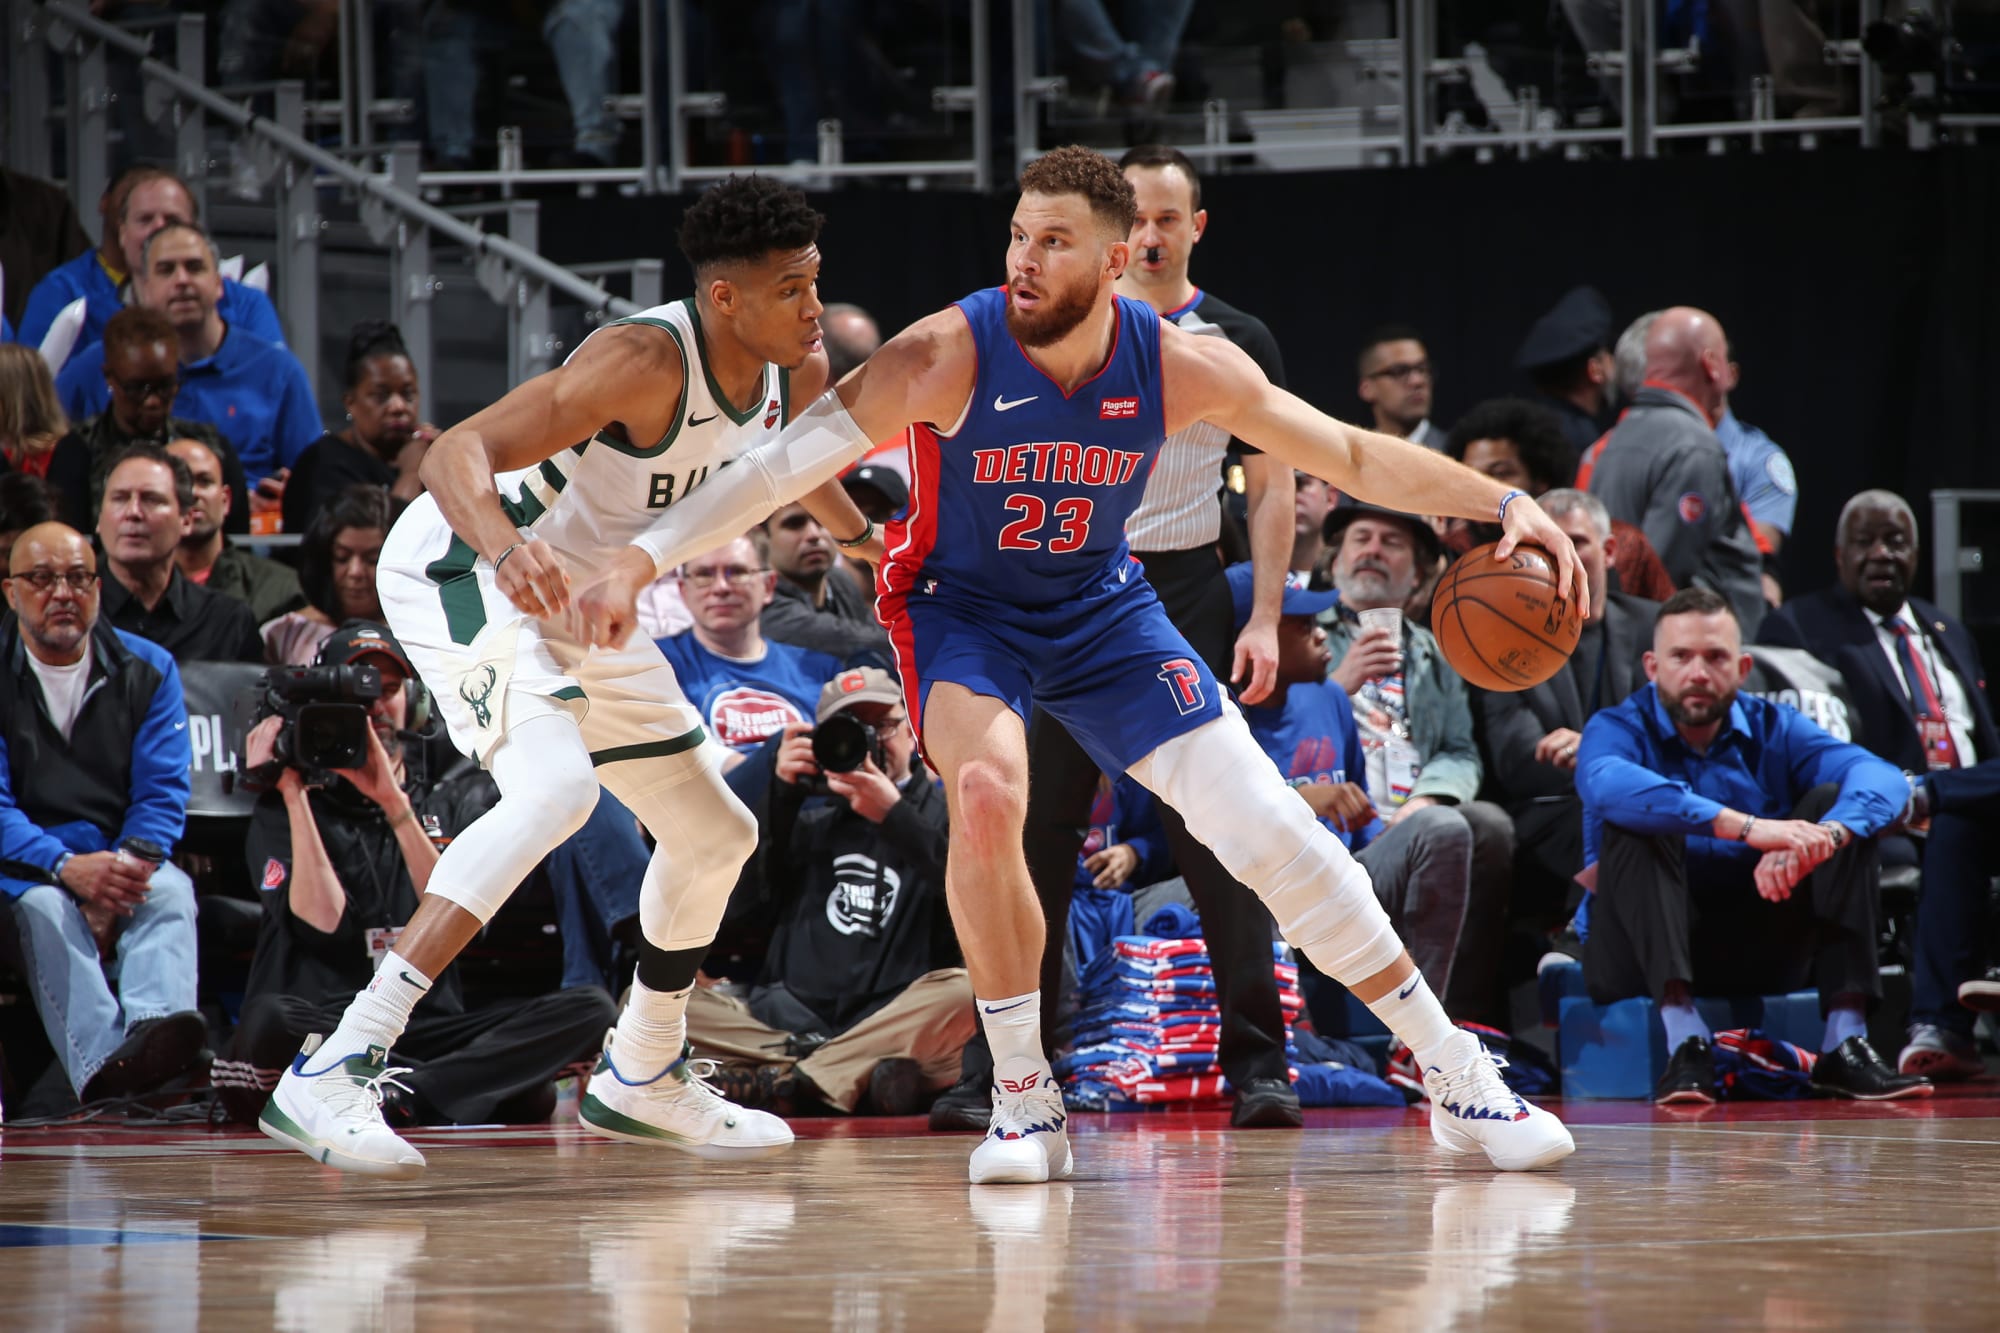 Where does Detroit Pistons' Blake Griffin rank among power forwards?